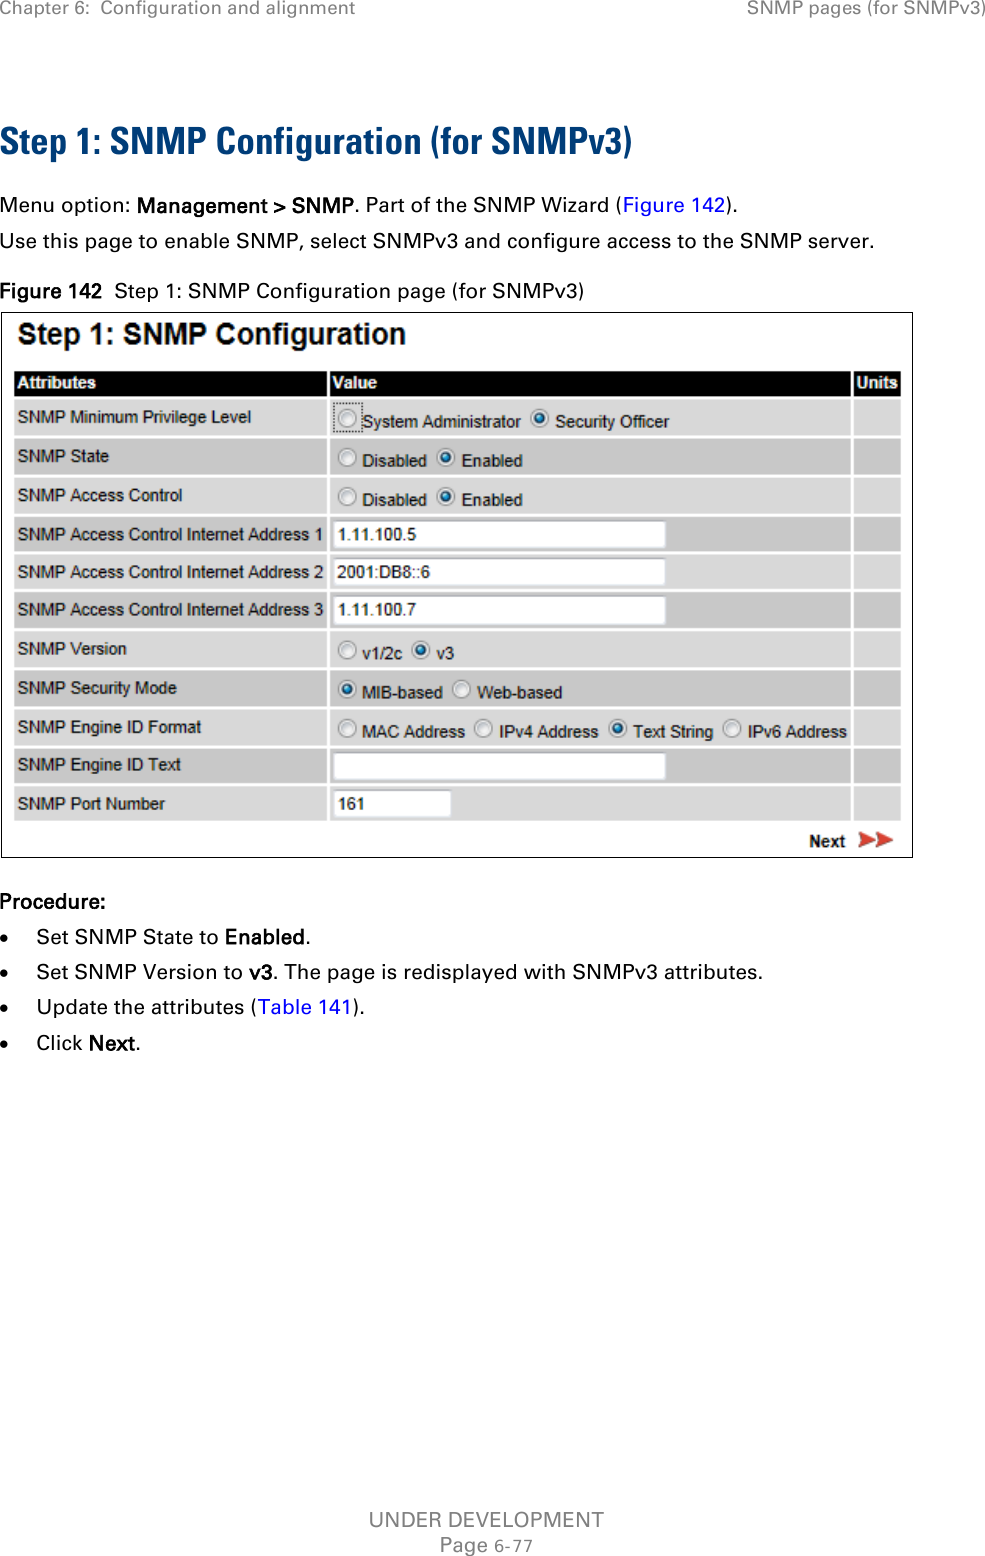 Chapter 6:  Configuration and alignment SNMP pages (for SNMPv3)  Step 1: SNMP Configuration (for SNMPv3) Menu option: Management &gt; SNMP. Part of the SNMP Wizard (Figure 142). Use this page to enable SNMP, select SNMPv3 and configure access to the SNMP server.  Figure 142  Step 1: SNMP Configuration page (for SNMPv3)  Procedure: • Set SNMP State to Enabled. • Set SNMP Version to v3. The page is redisplayed with SNMPv3 attributes. • Update the attributes (Table 141). • Click Next.     UNDER DEVELOPMENT Page 6-77 